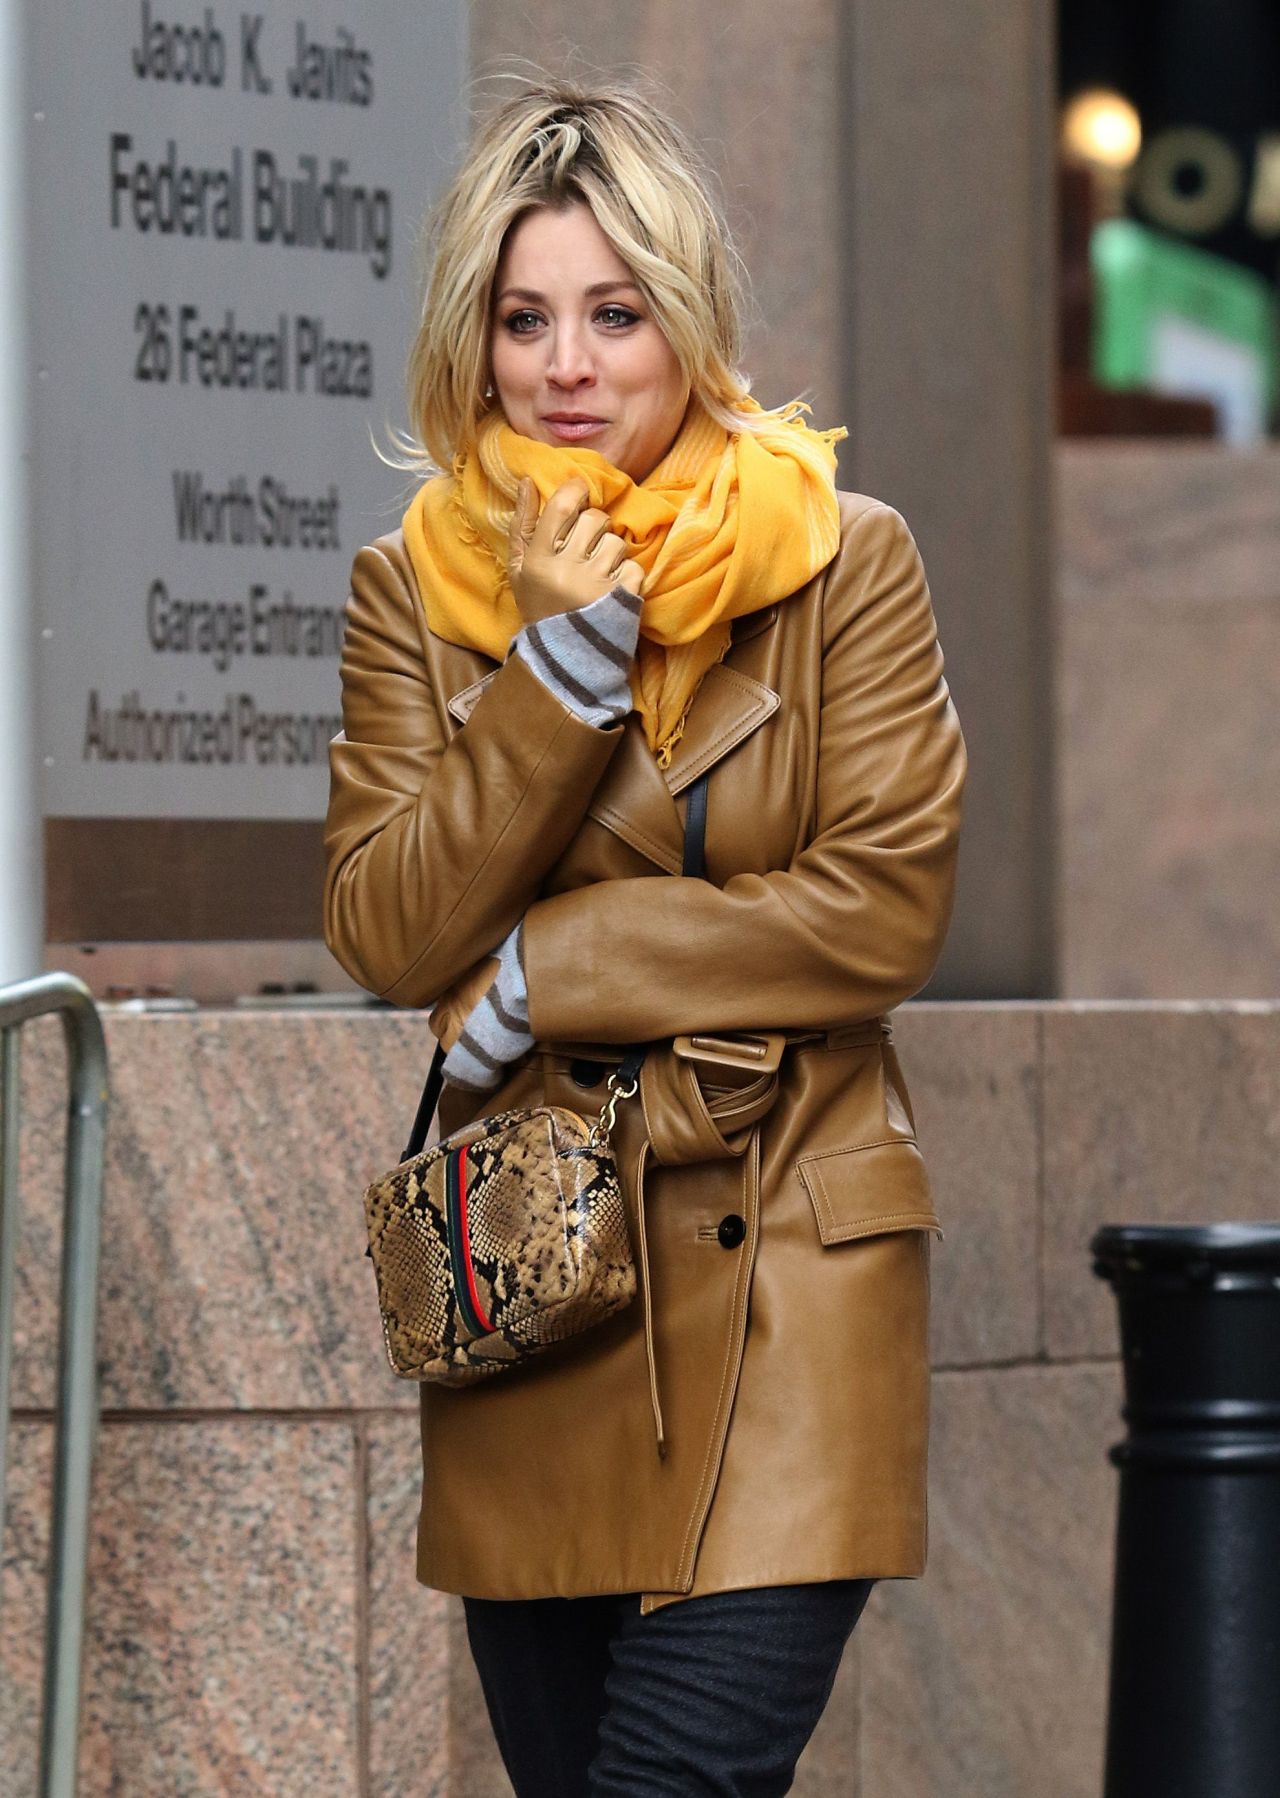 Kaley Cuoco - The Flight Attendant Set in NYC 11/13/2019 